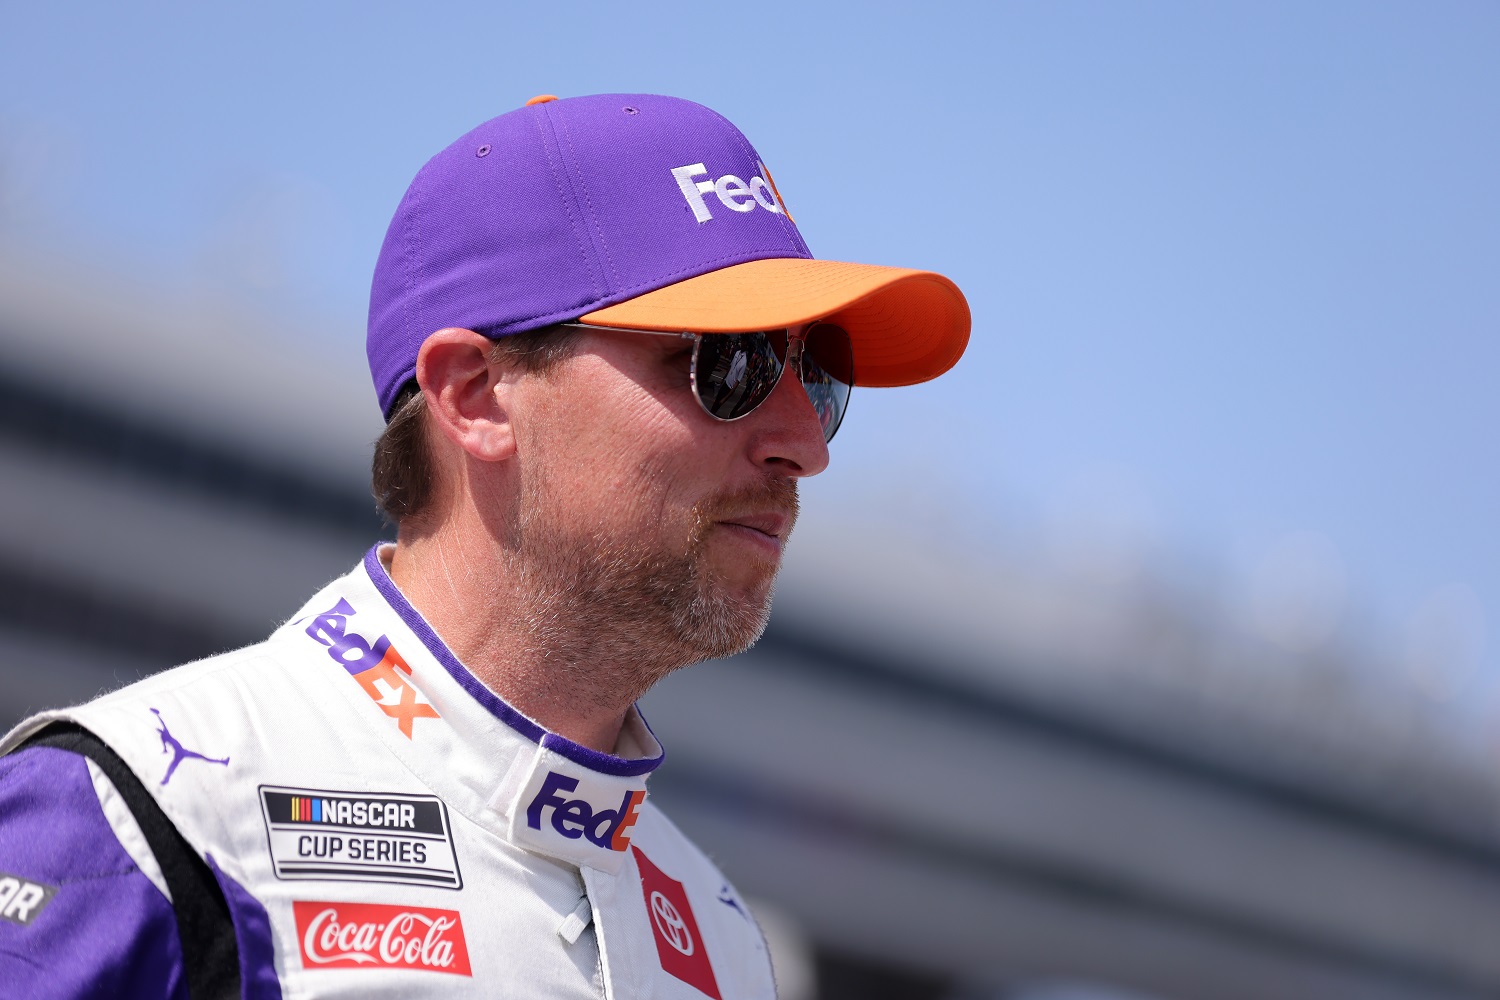 Denny Hamlin stands on the grid prior to the NASCAR Cup Series Auto Trader EchoPark Automotive 500 at Texas Motor Speedway on Sept. 25, 2022, in Fort Worth, Texas.